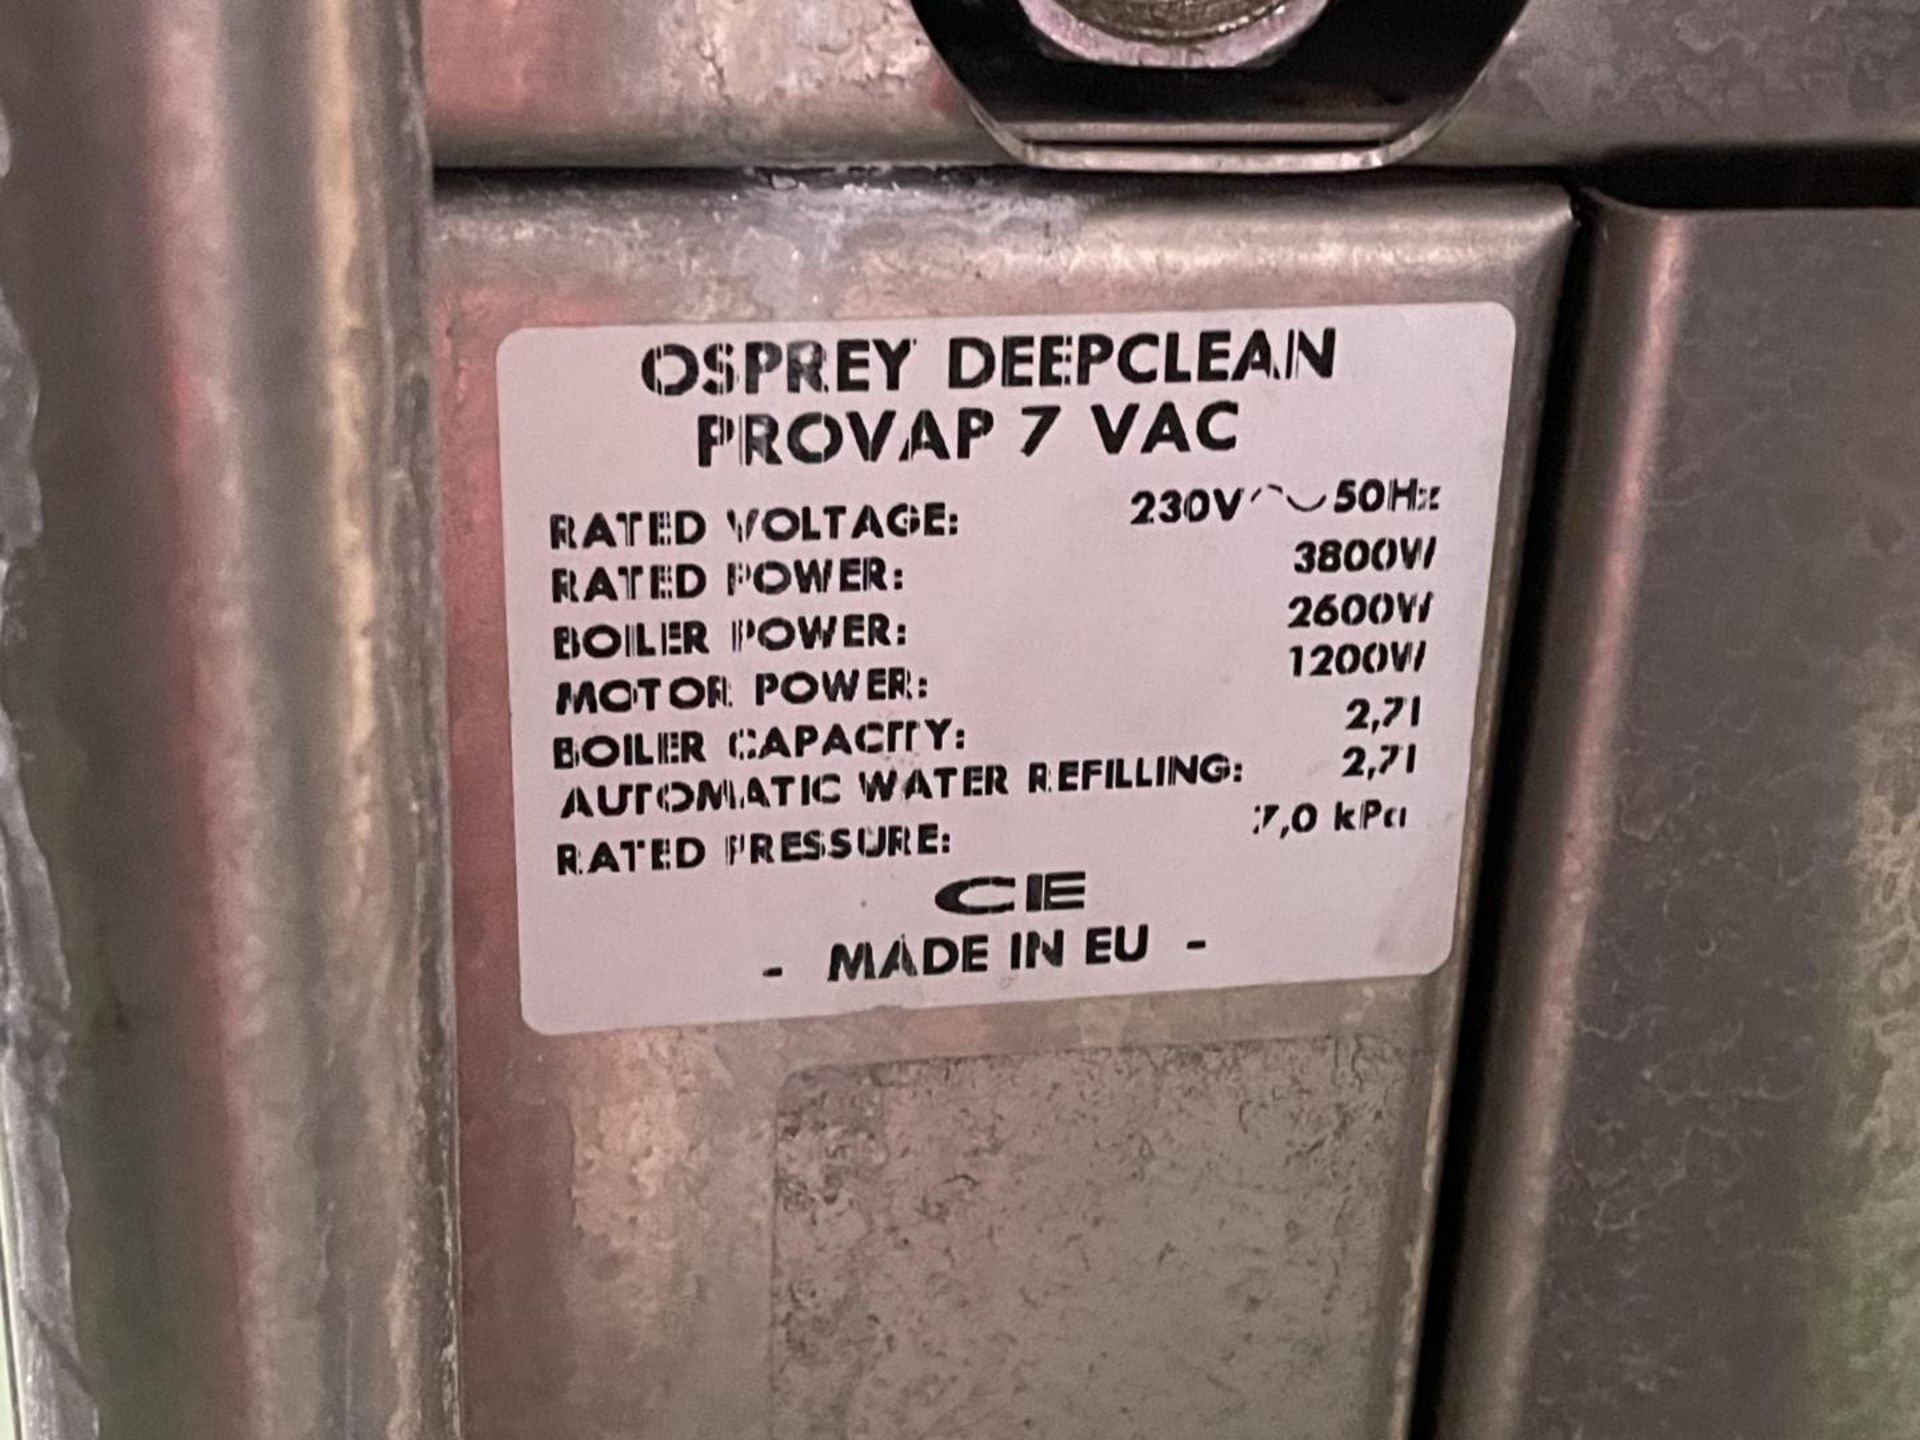 1 x Osprey Deep Clean Provap 7 VAC Steam Cleaner - Removed From a Working Environment - CL011 - Ref: - Image 4 of 9